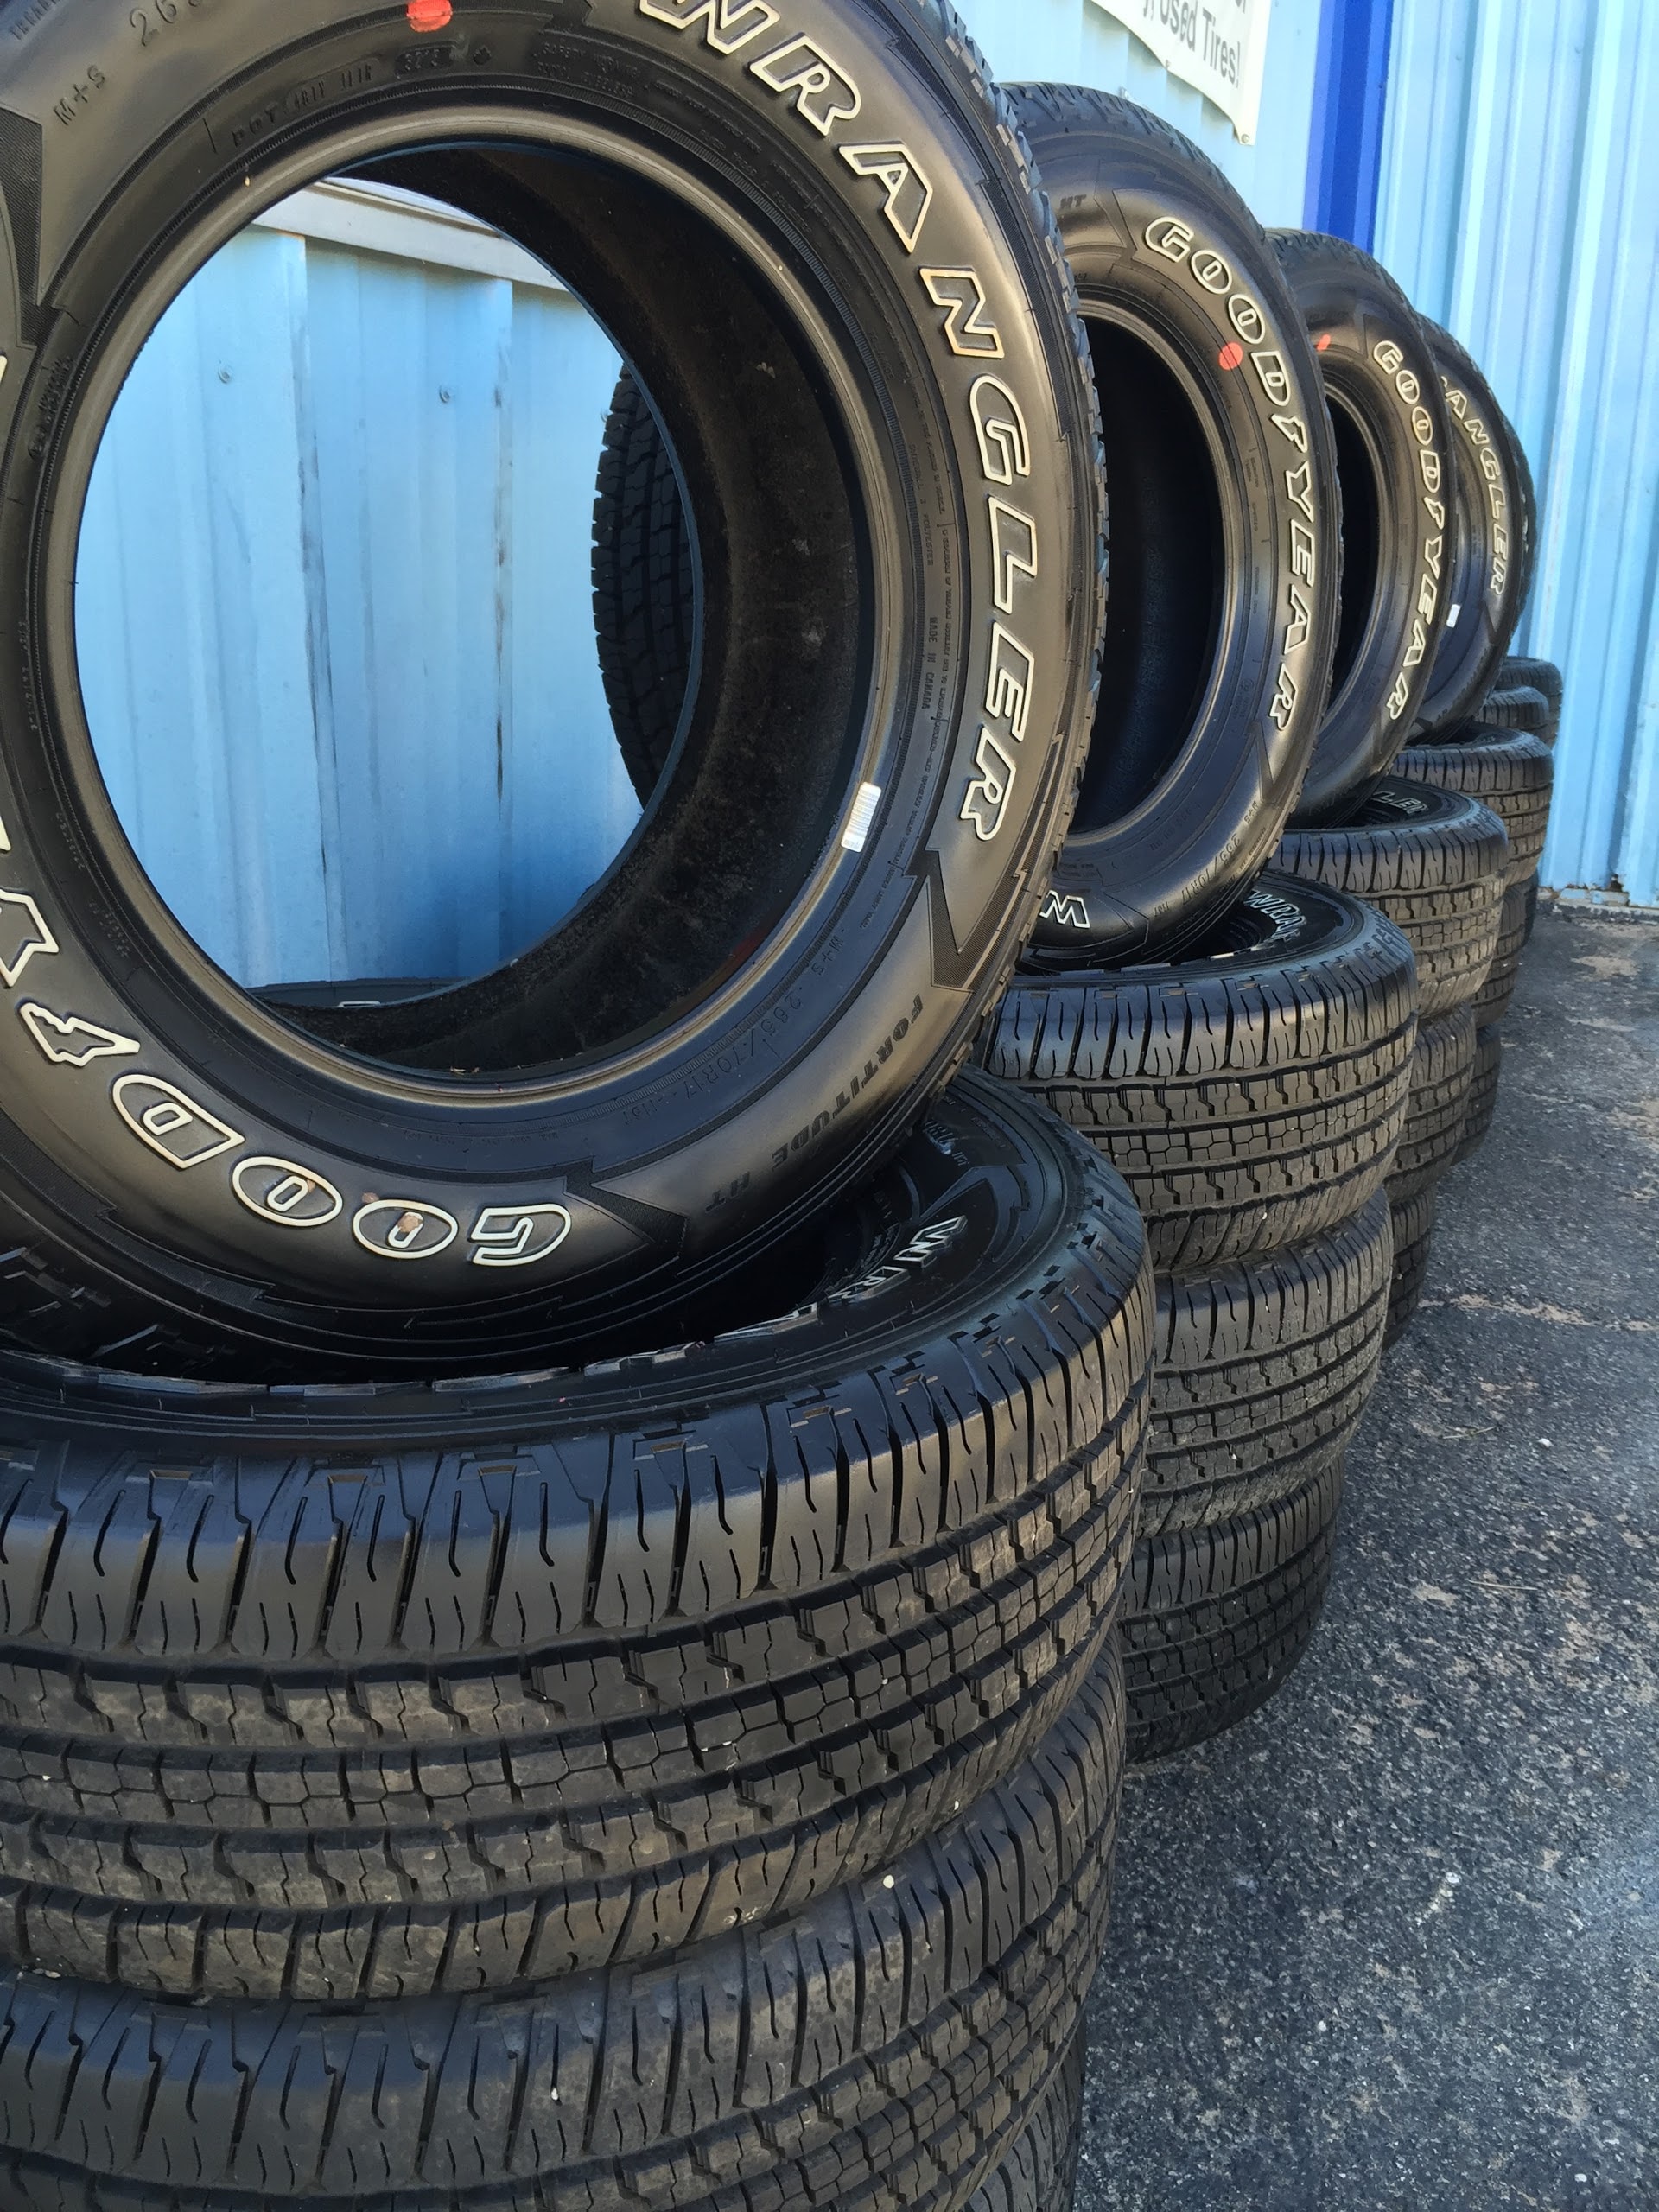 Chaparral Tire Guys - Midland, TX, US, tires for sale